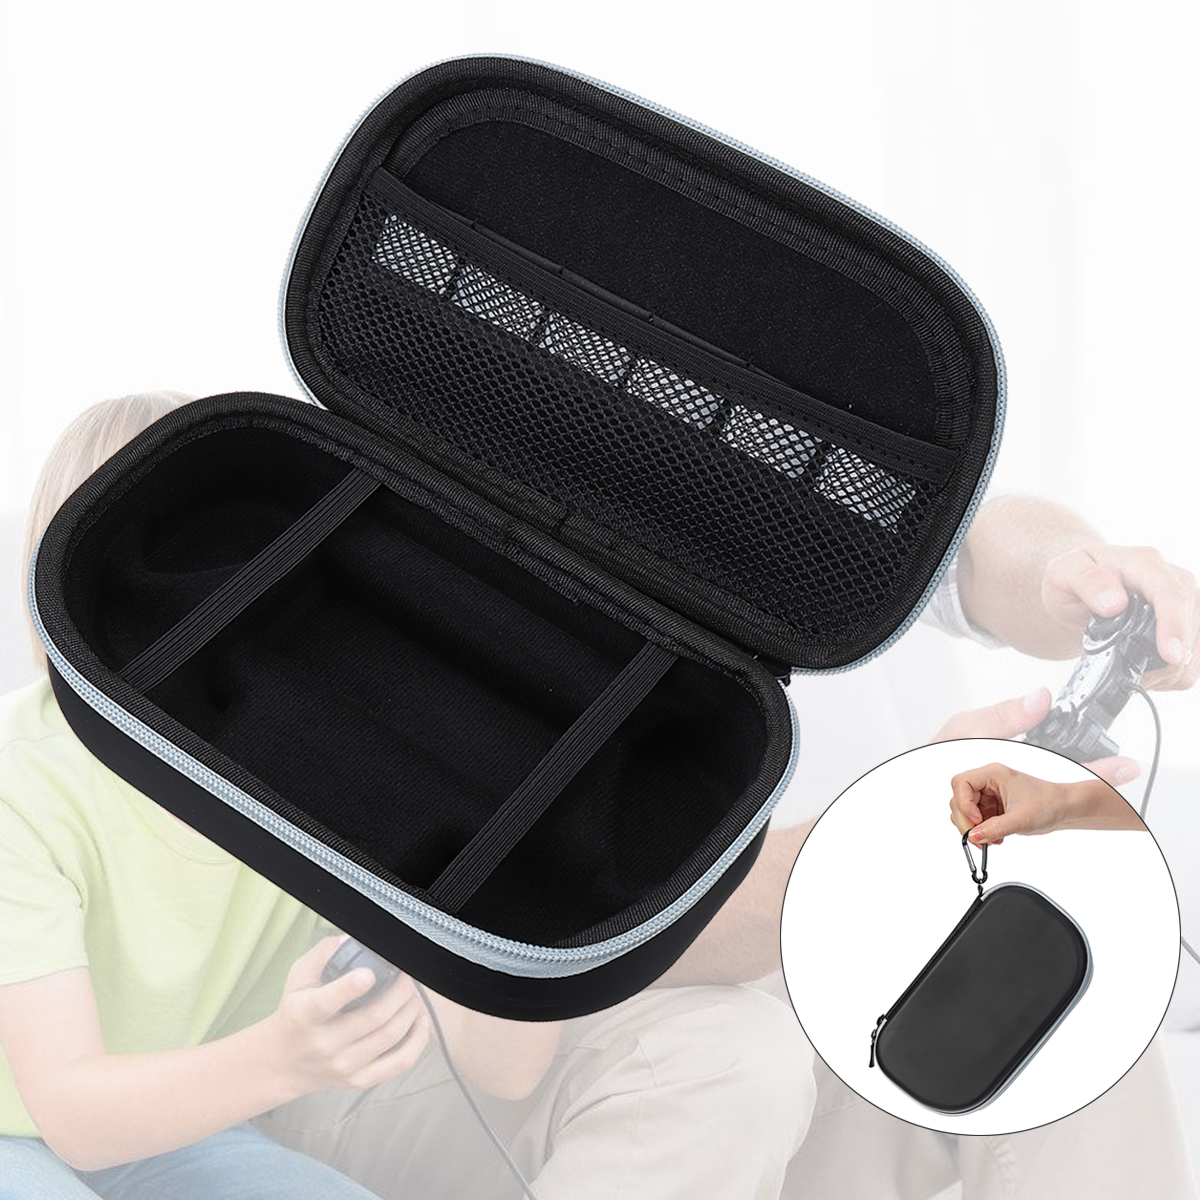 Portable-Storage-Case-EVA-Black-Hard-Cover-Protective-Carry-Case-for-psv1000-2000-Console-1974705-13